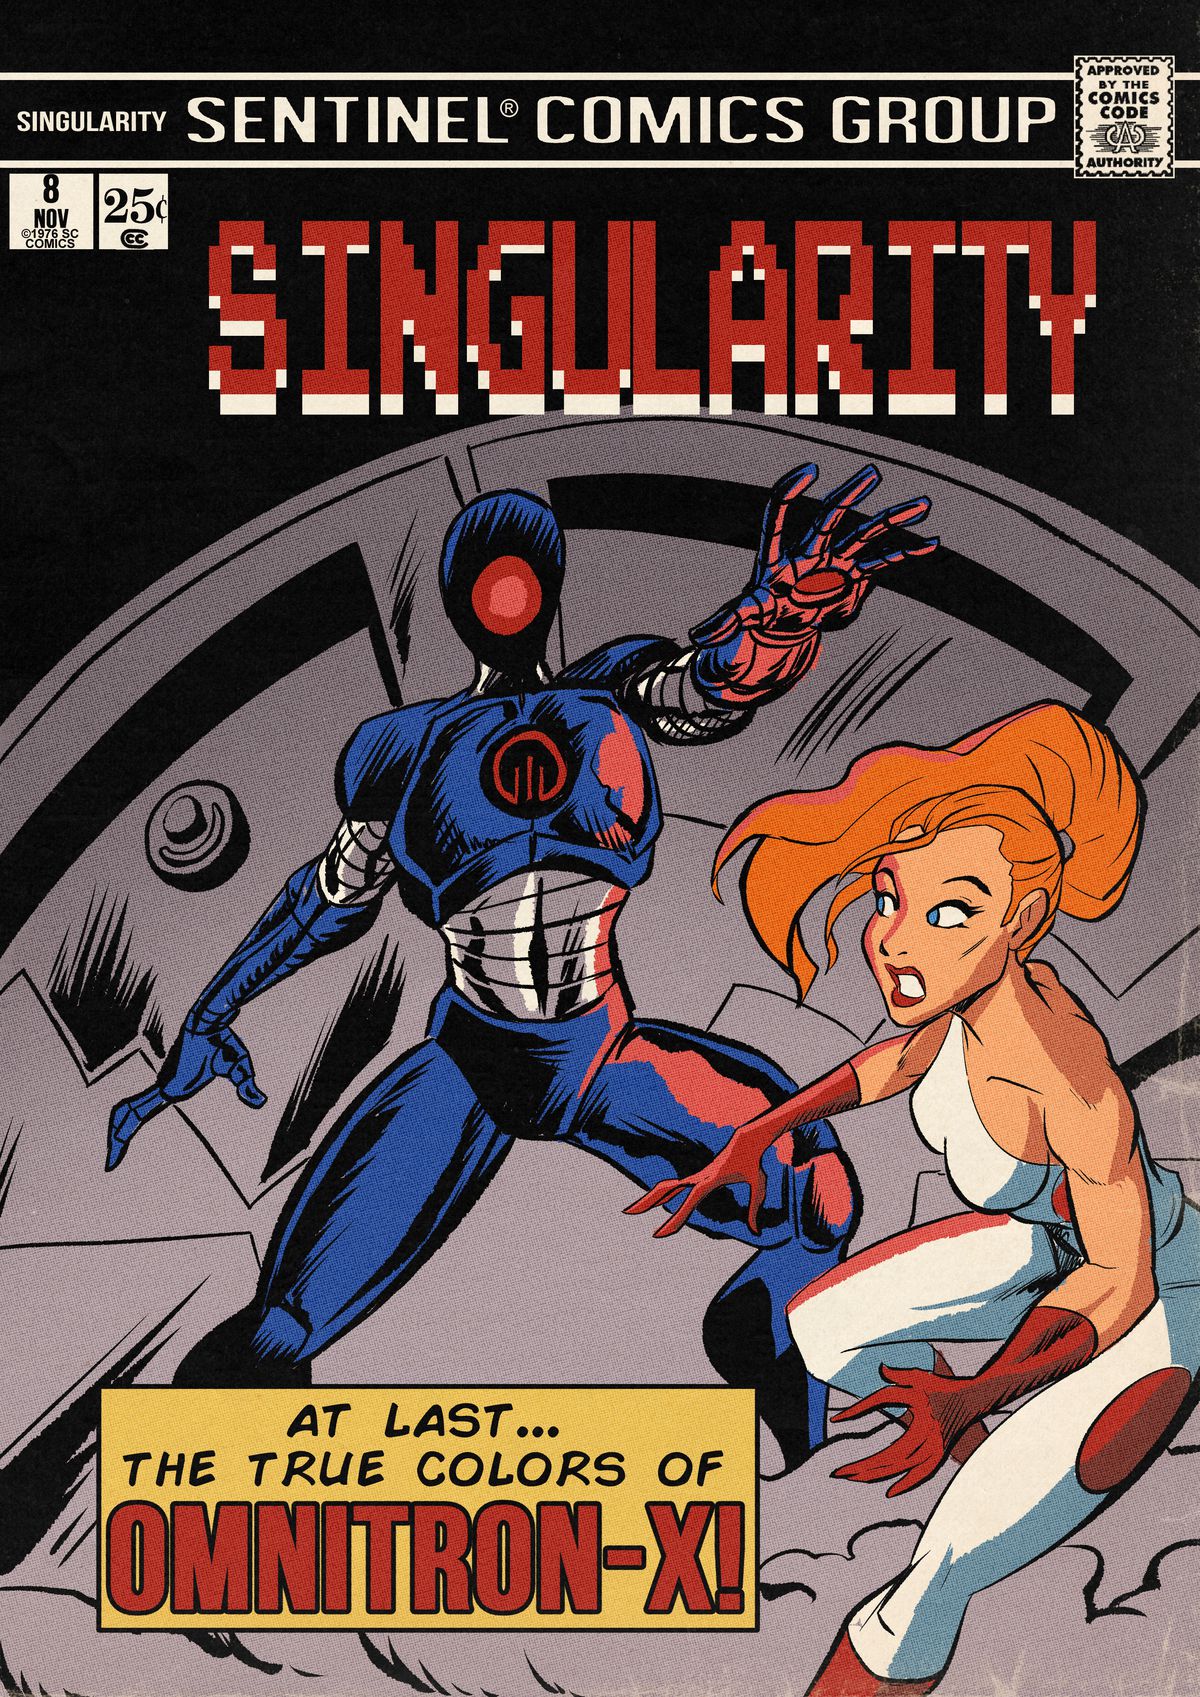 The cover of Sentinel Comics Singularity series shows a robot in front of a vault door, a woman superhero in white ready to fight them.